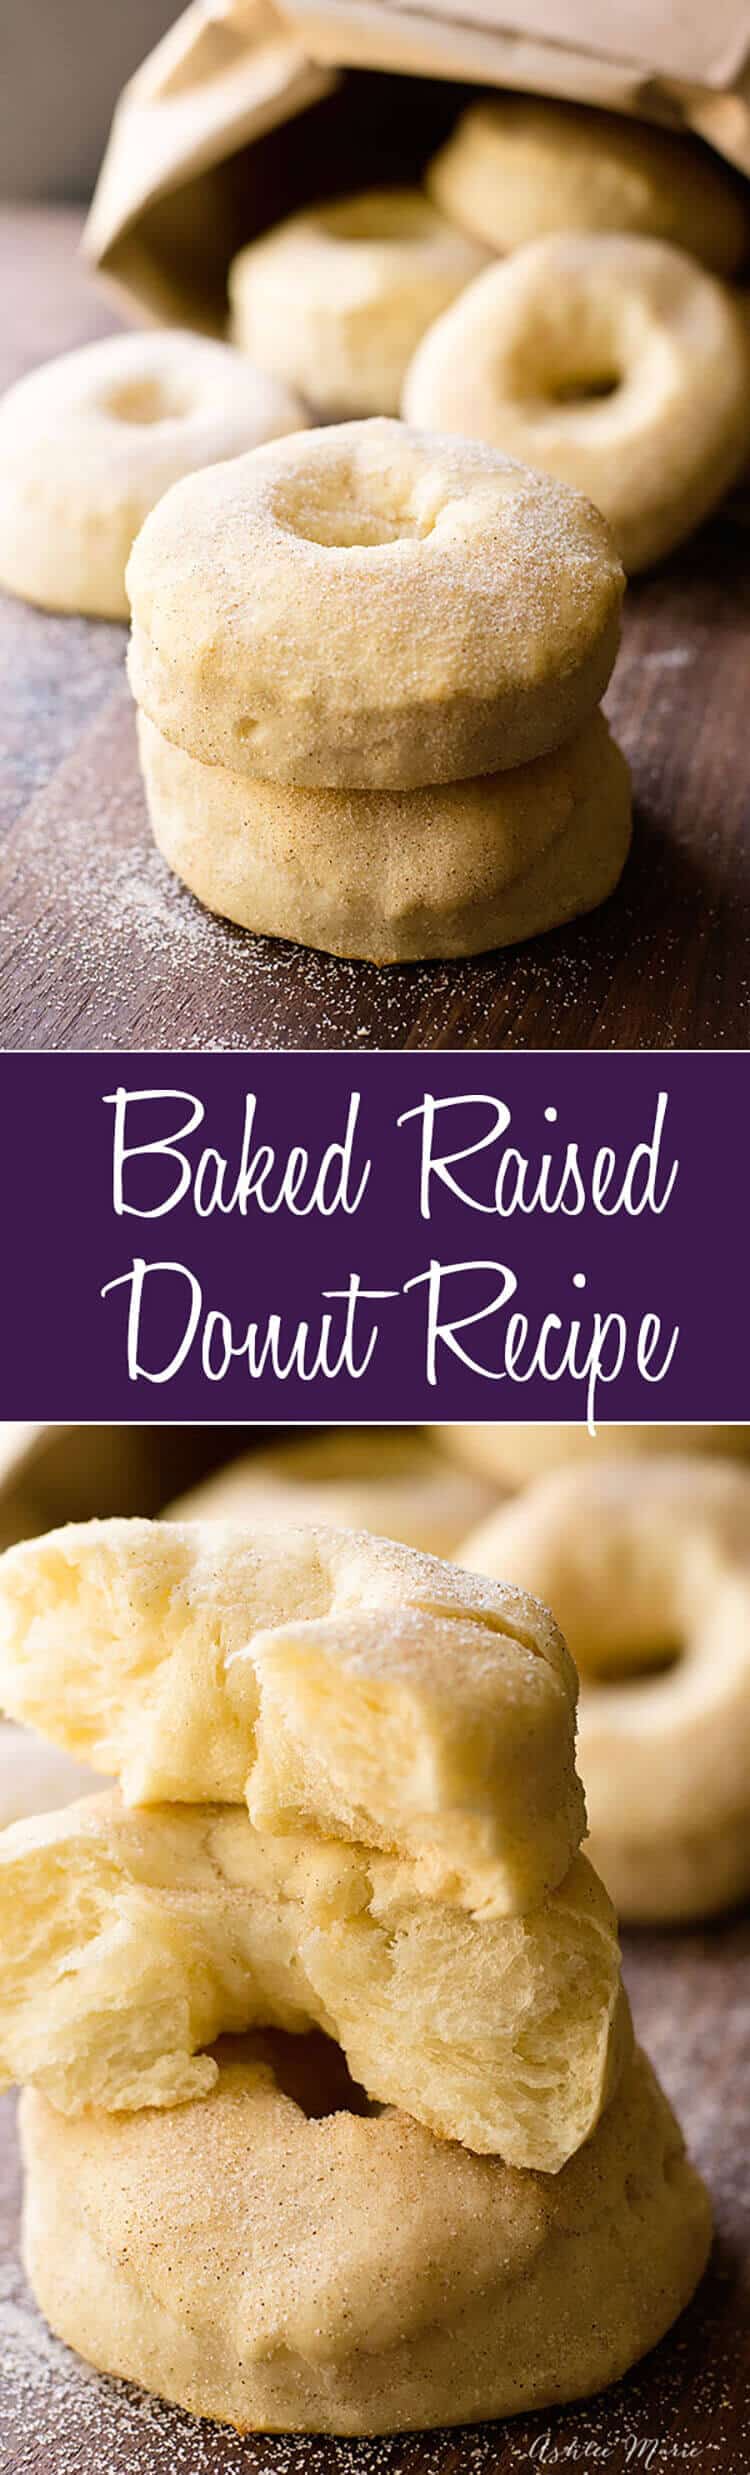 These raised baked donuts are light, fluffy and oh so delicious